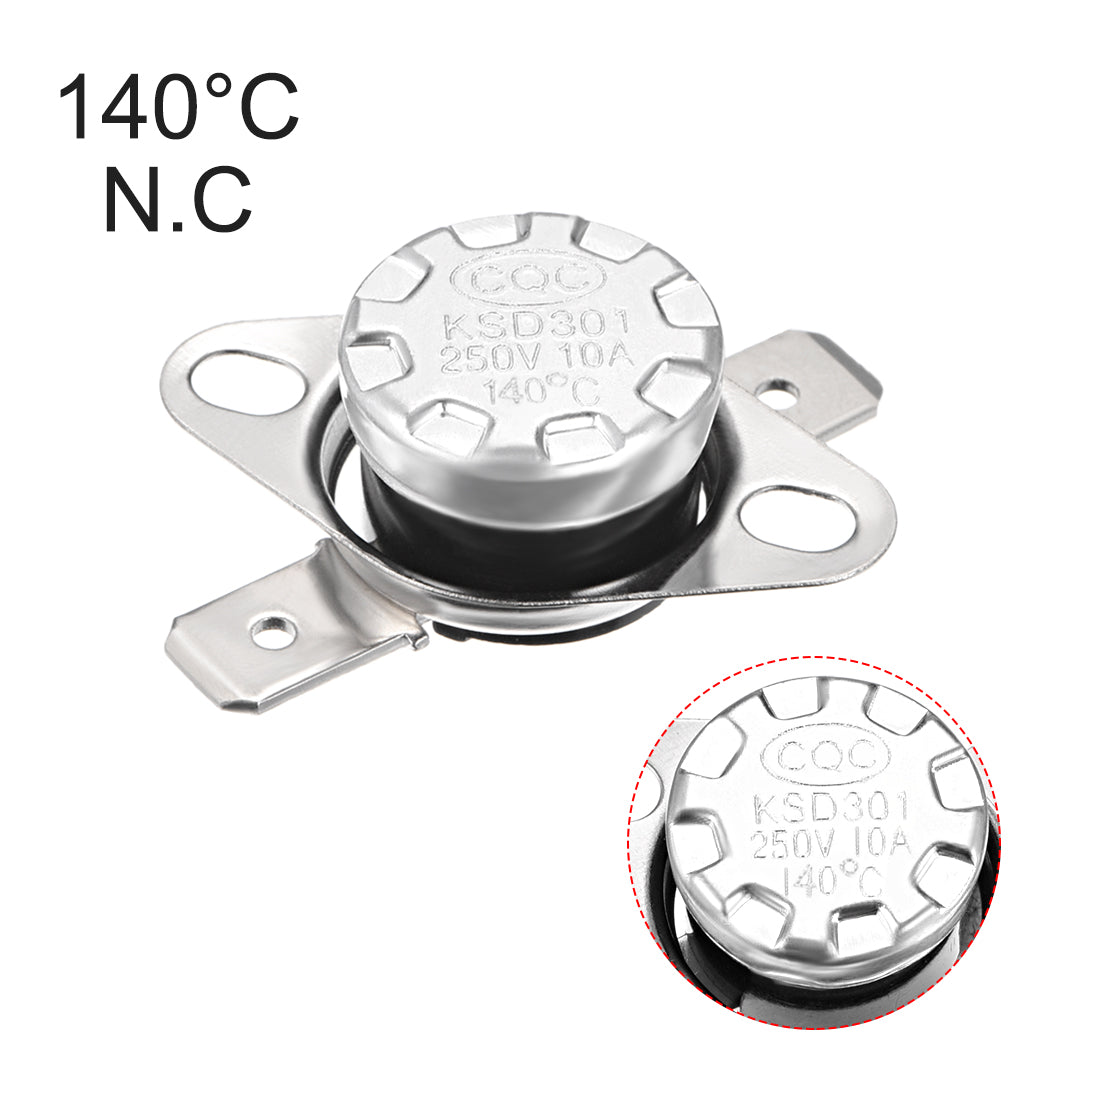 uxcell Uxcell Temperature Control Switch , Thermostat KSD301 140°C , 10A , Normally Closed N.C 6.3mm Pin 2pcs